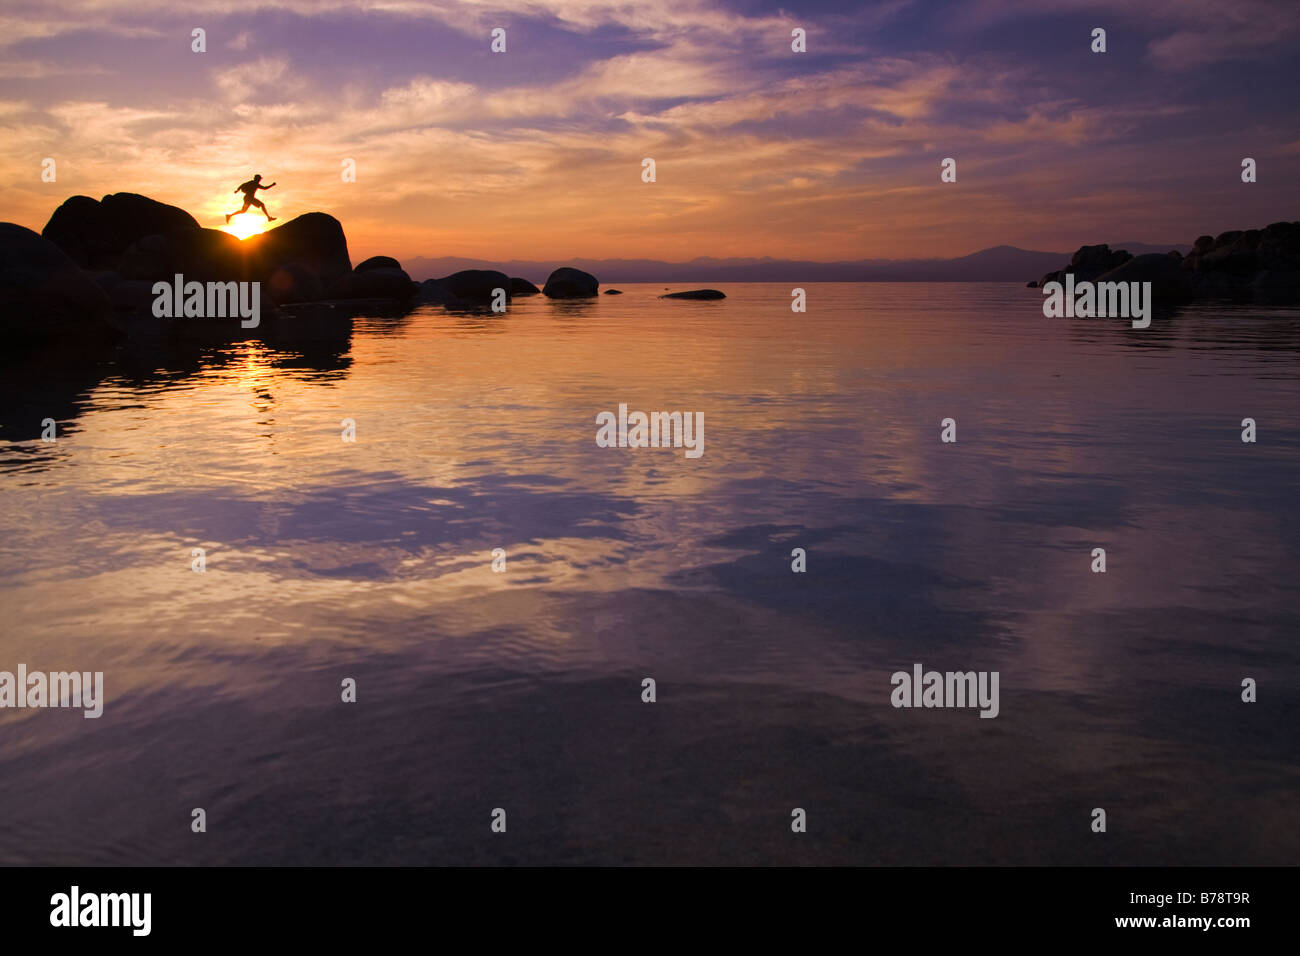 A man jumping on a rock on the shore of Lake Tahoe in California at sunset with reflecting water Stock Photo